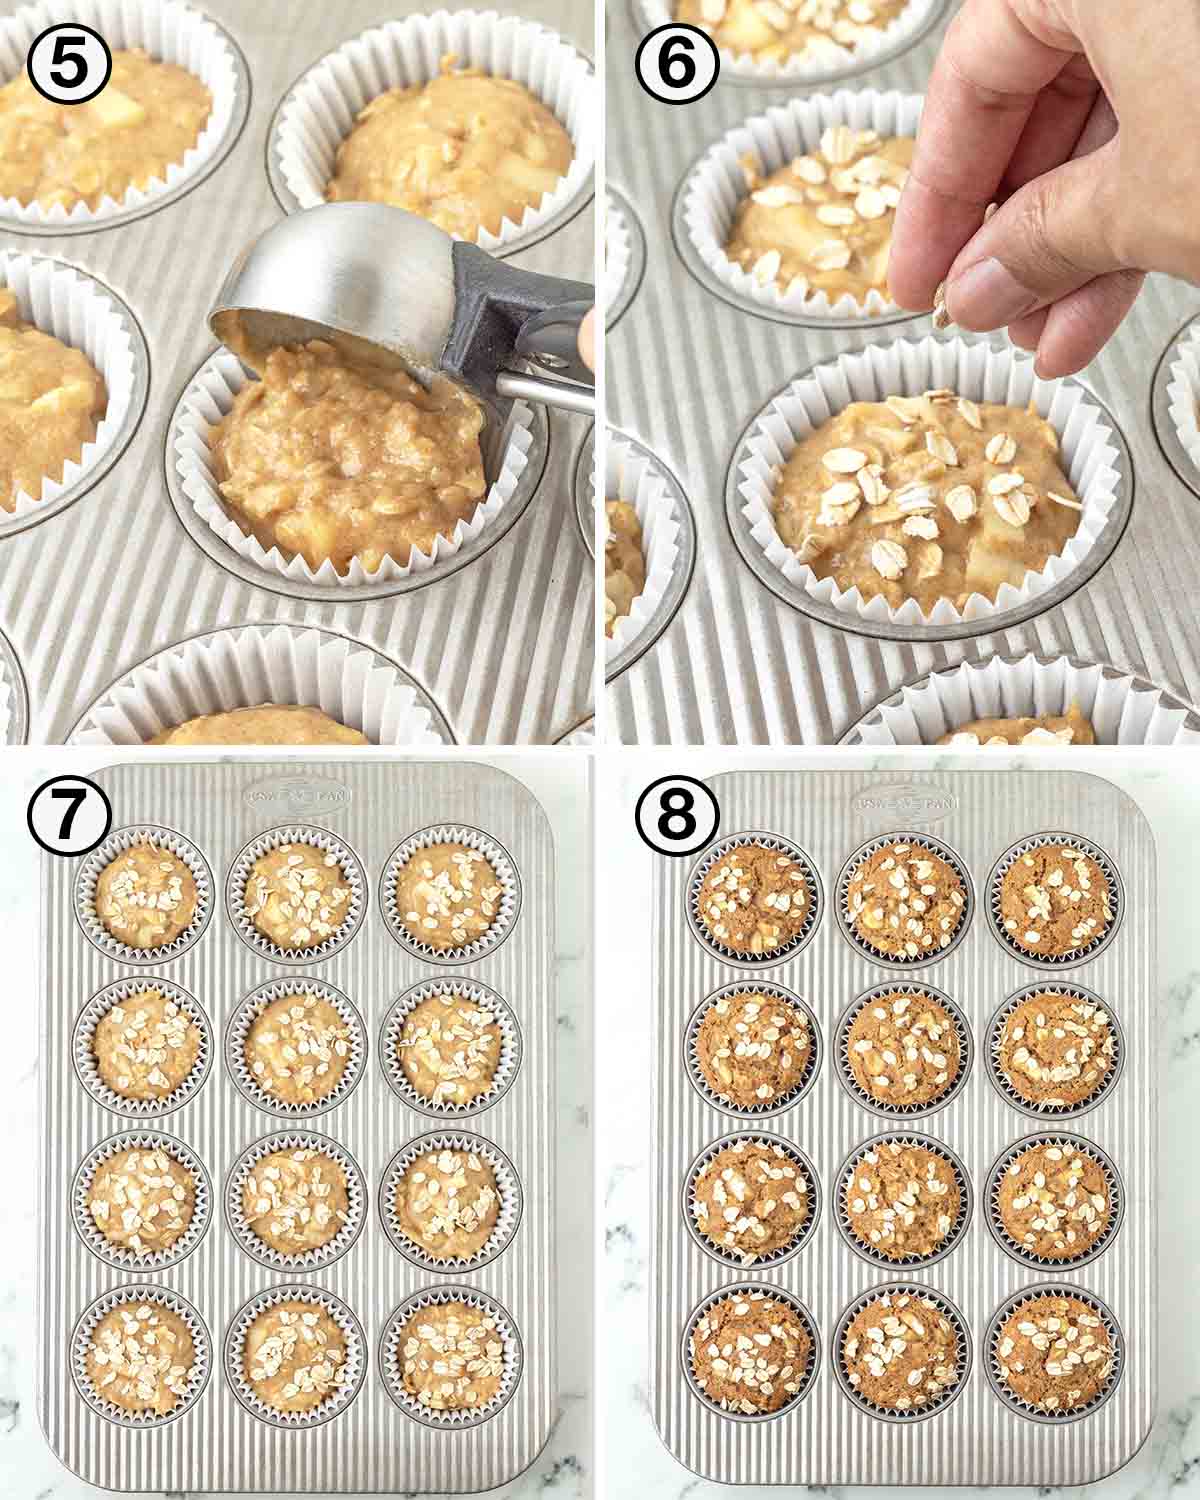 A collage of four images showing the second sequence of steps needed to make vegan apple oatmeal muffins.